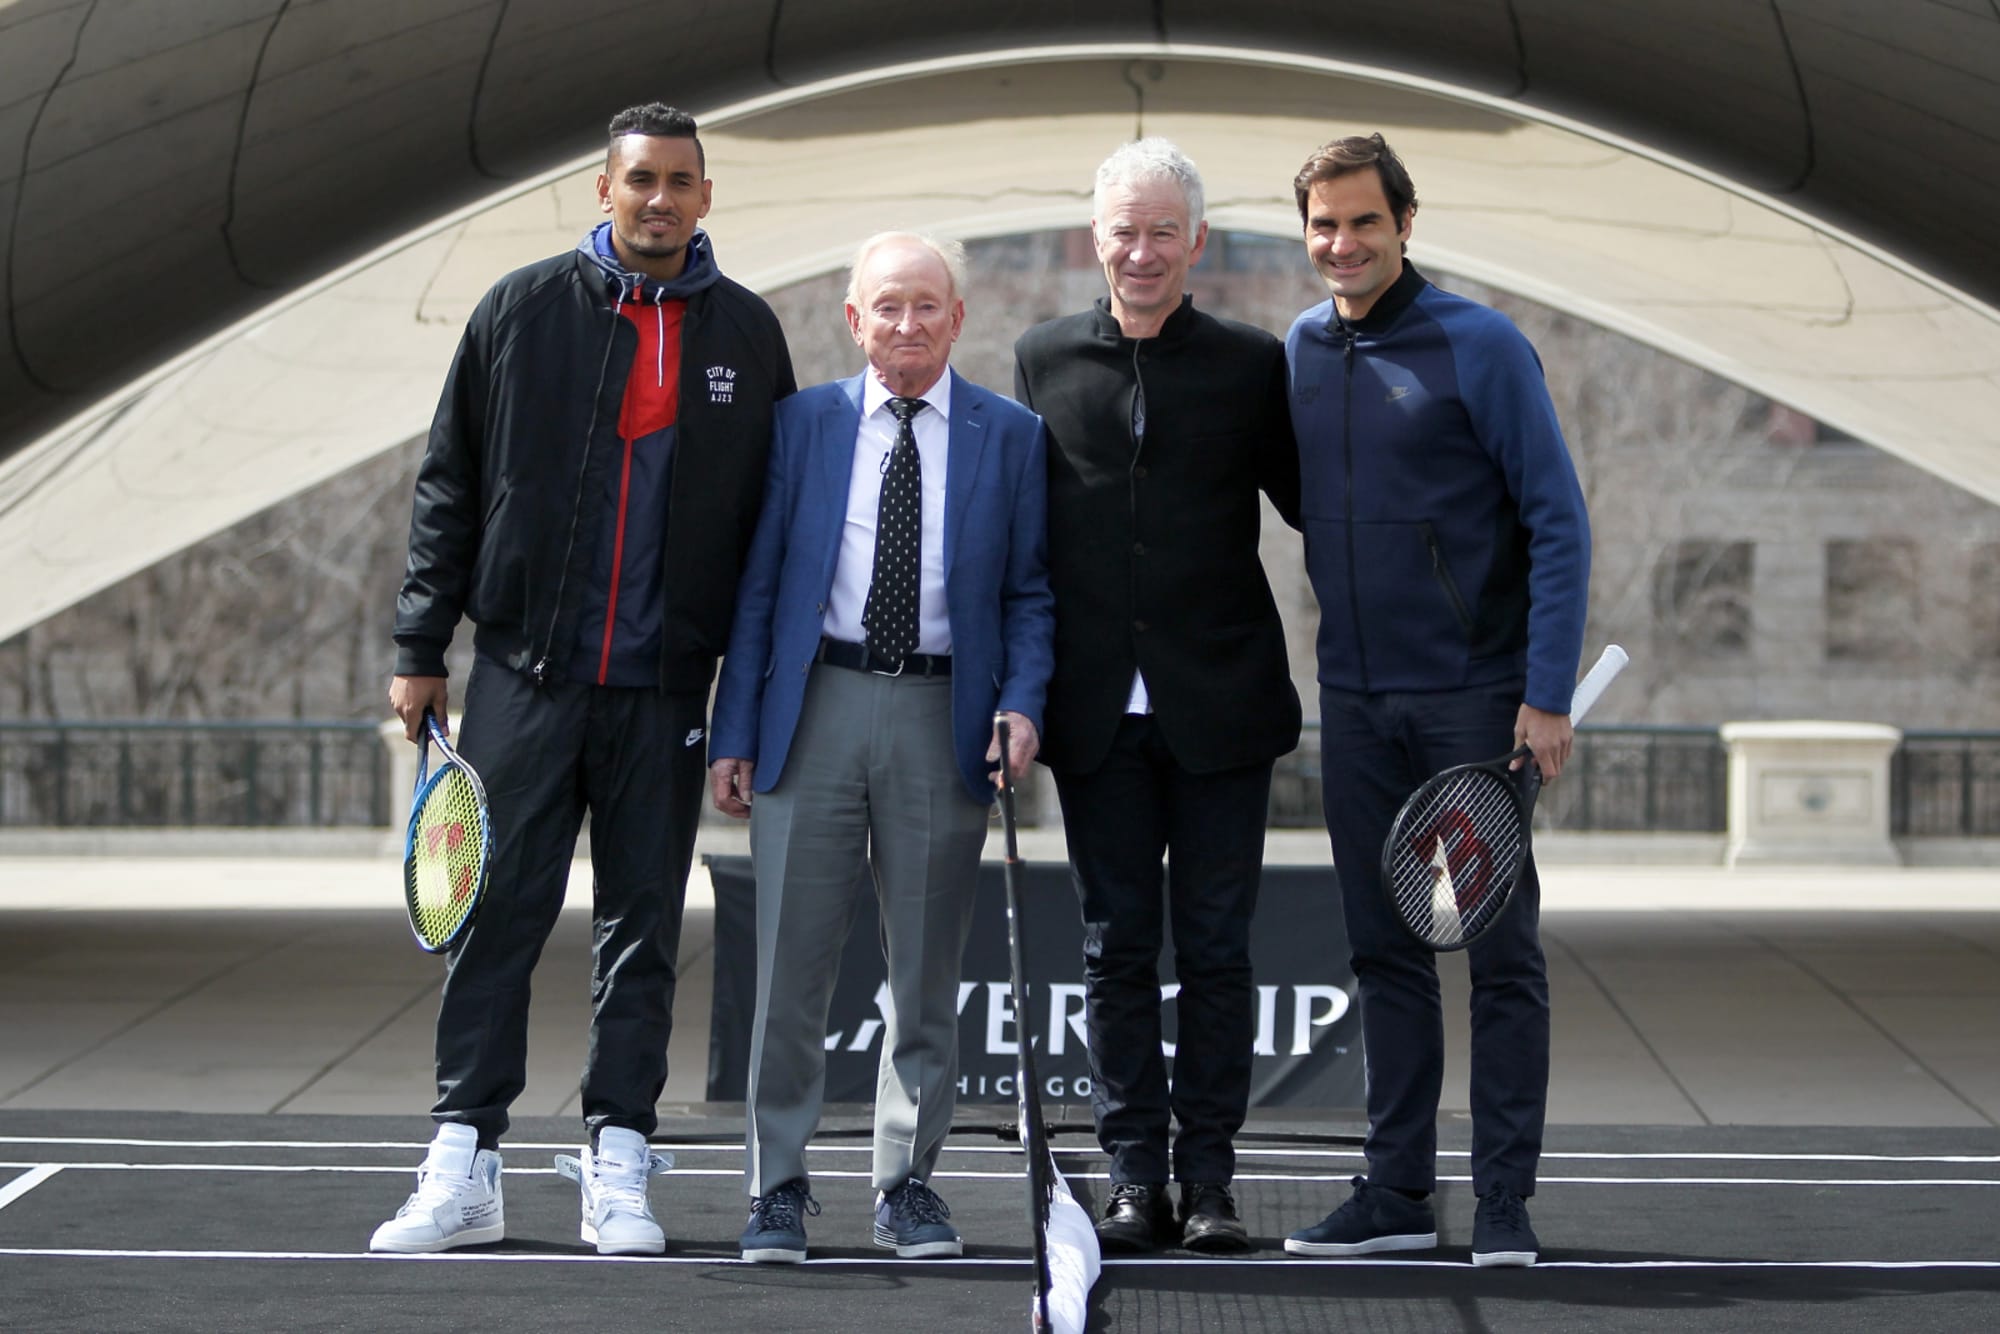 Laver Cup 2018 What we know so far and what to expect